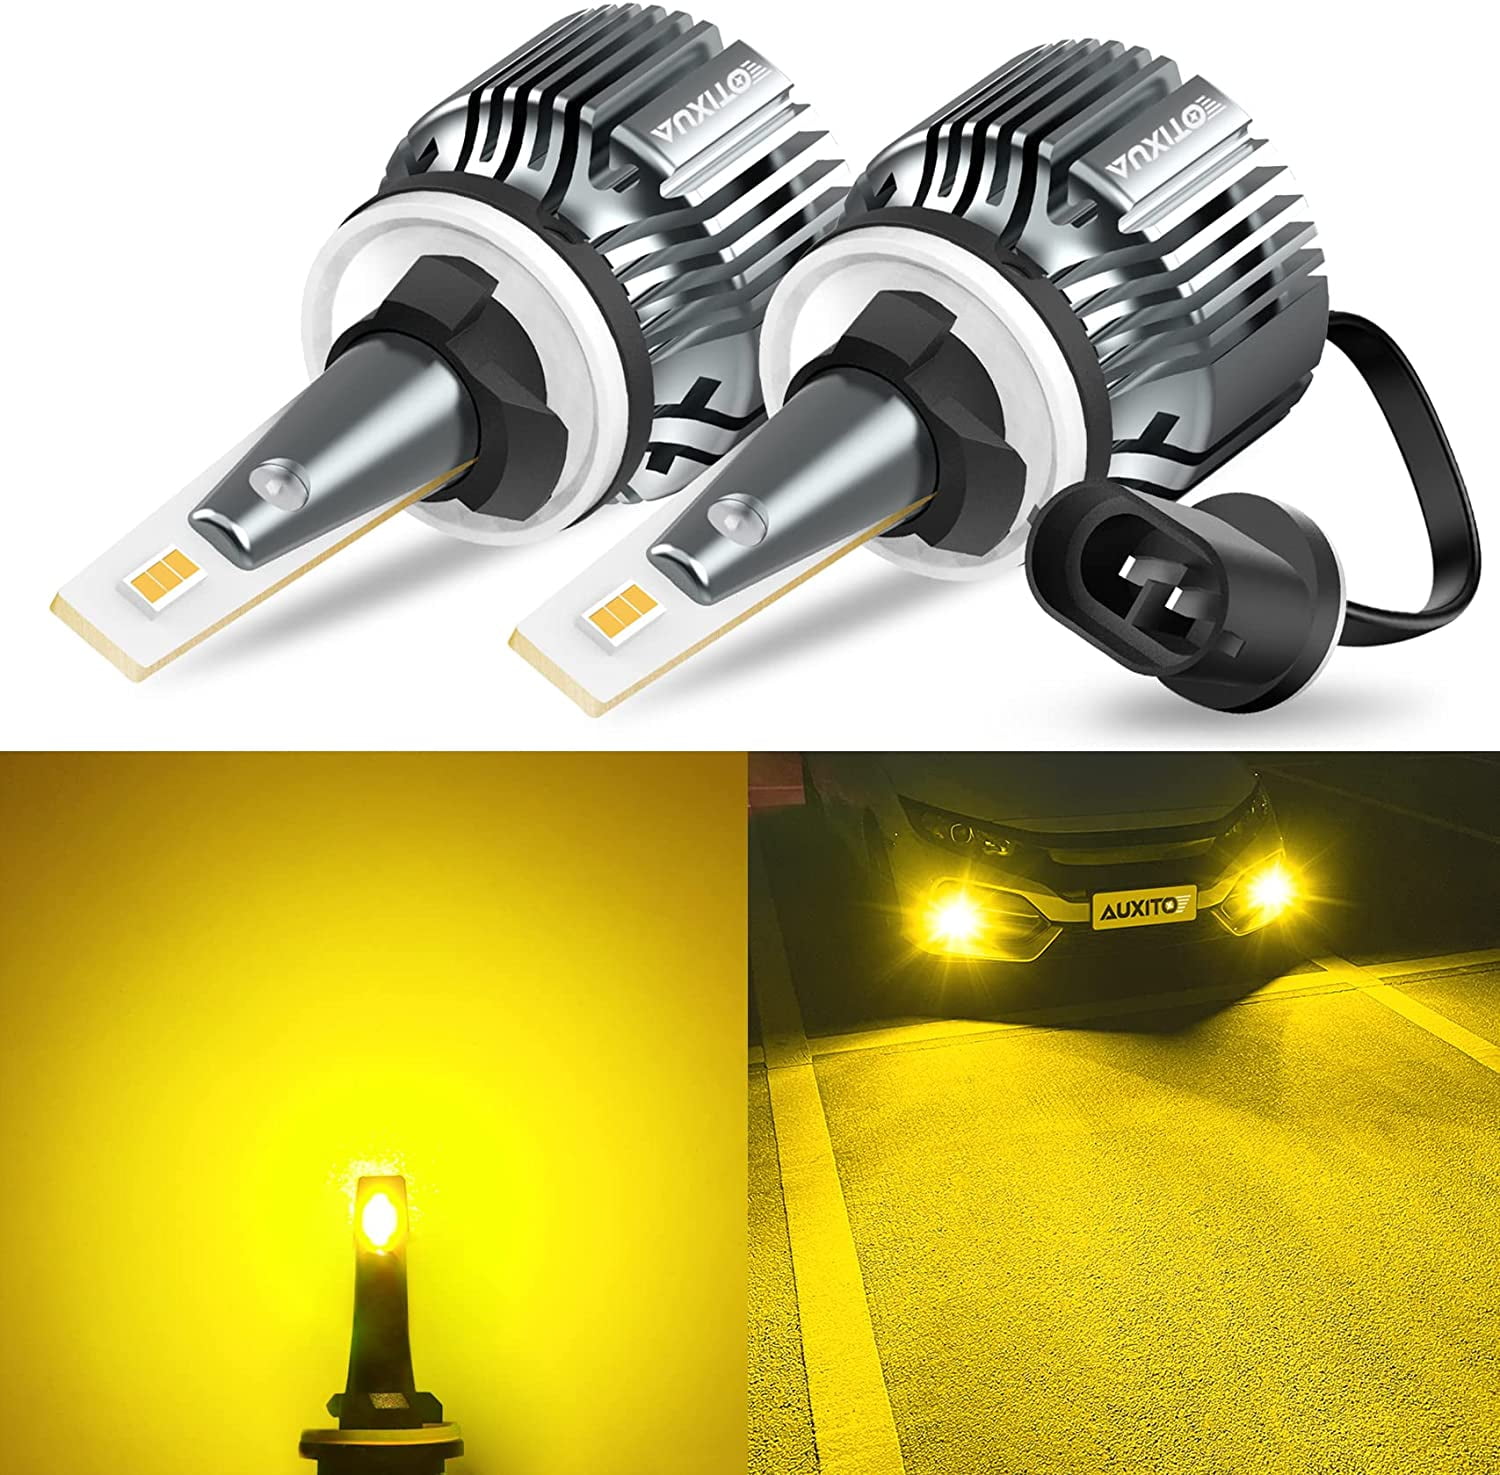 AUXITO 880/899/893 LED Fog Light Bulbs, 3000K Amber Yellow, 30W 6000LM  Super Bright, Wireless, Plug and Play, Long Lifespan, Can-bus Error Free,  885 DRL Replacement for Chevy, Ford, GMC, Pack of 2 